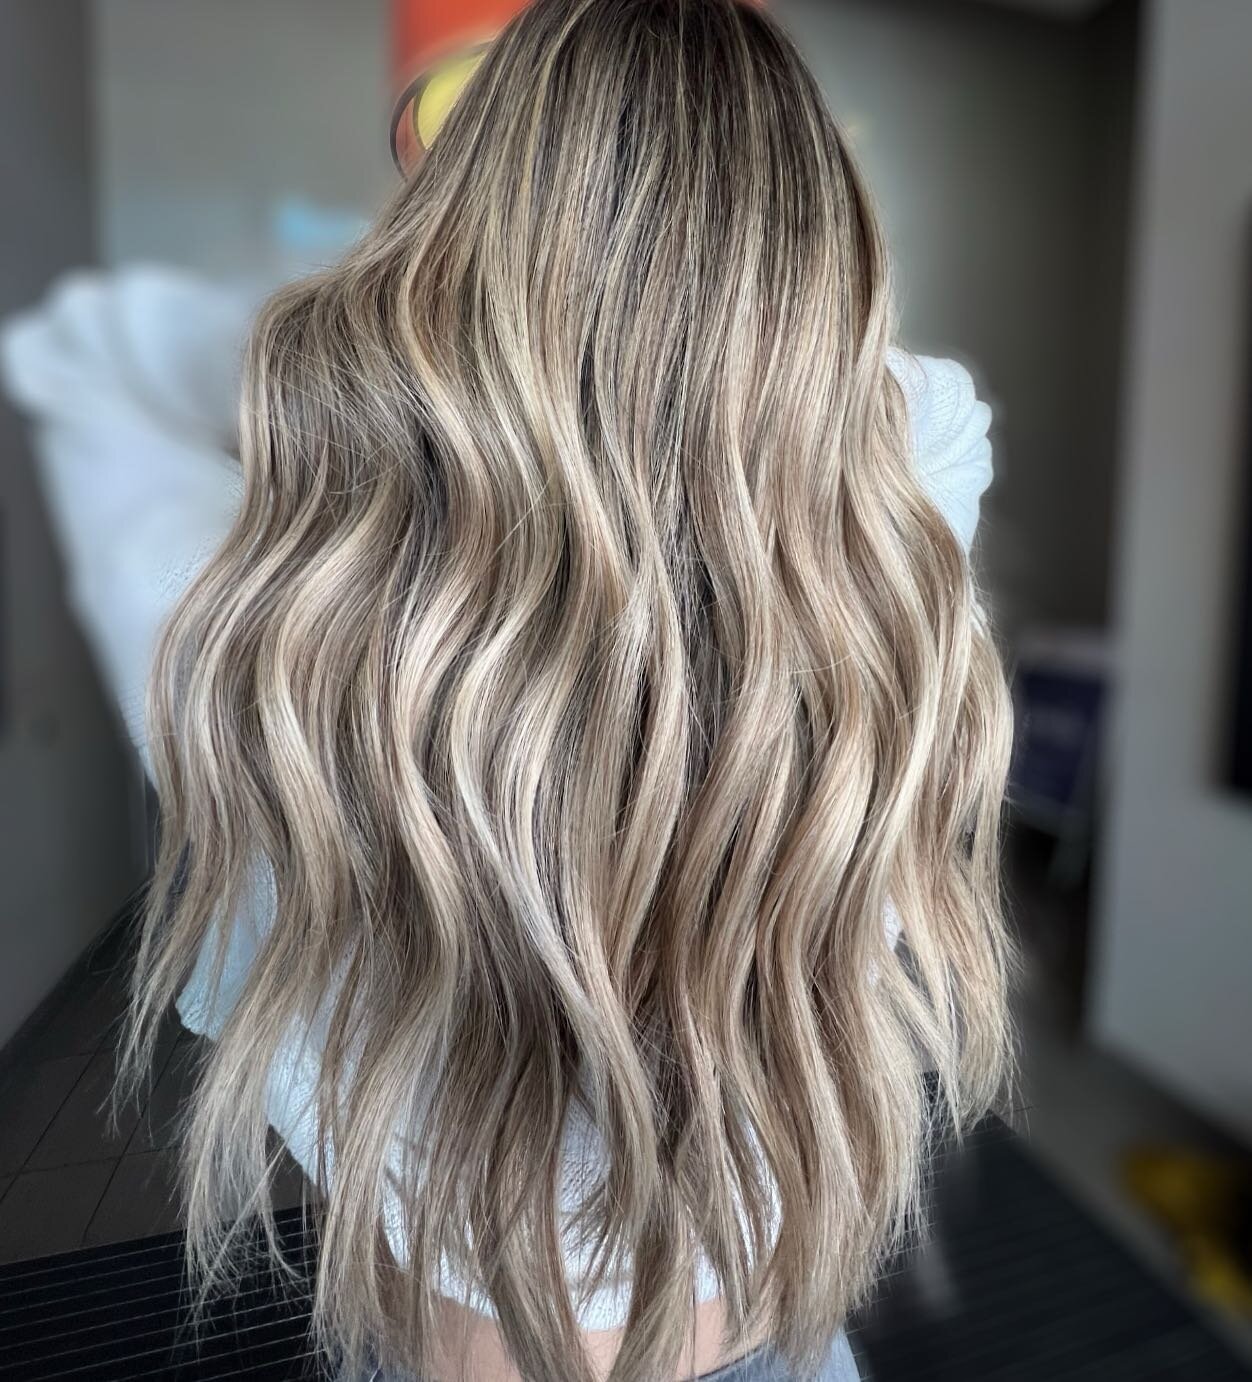 Sometimes There Are No Words 🤍
.
Listed using @lorealpro studio 9
.
Prepped &amp; finished with @k18hair 
.
Styled using @t3micro 
.
.
#blondespecialist  #blondehaircolor #blondehairinspo  #btcfirstfeature  #btcpics  #behindthechair  #chicagohaircol